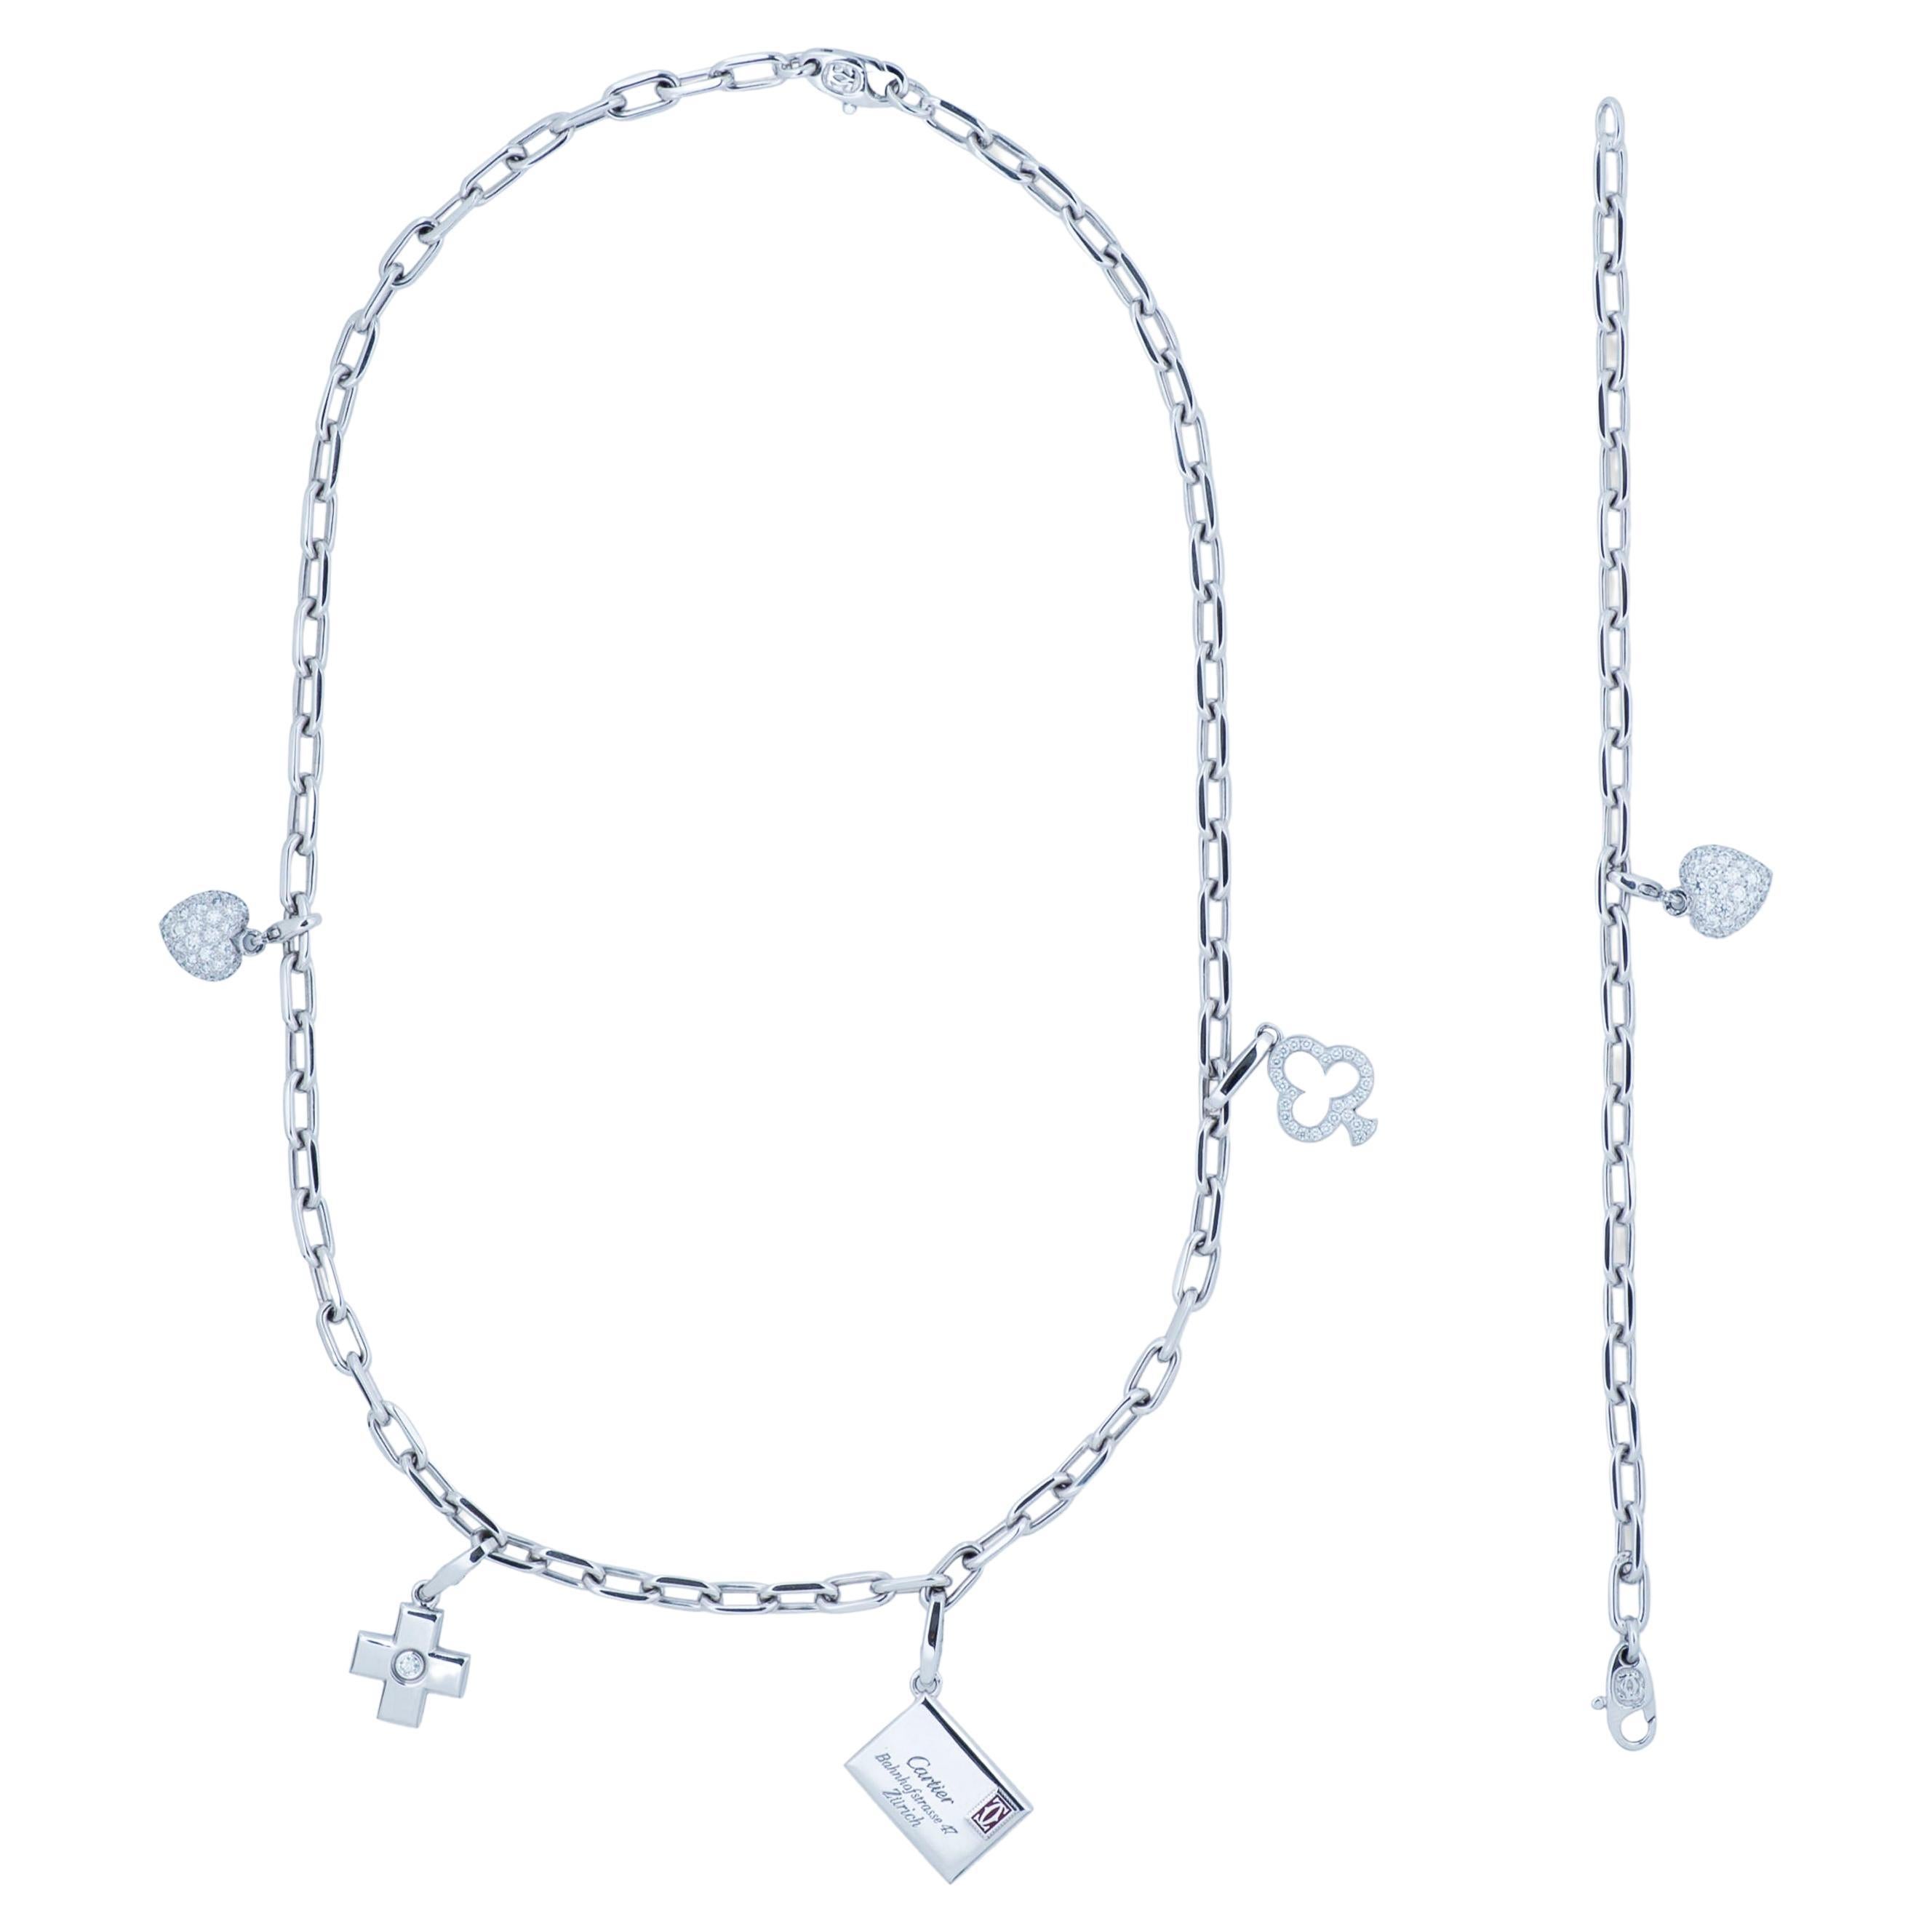 Cartier Diamond Charm Necklace and Charm Bracelet Set in 18k White Gold